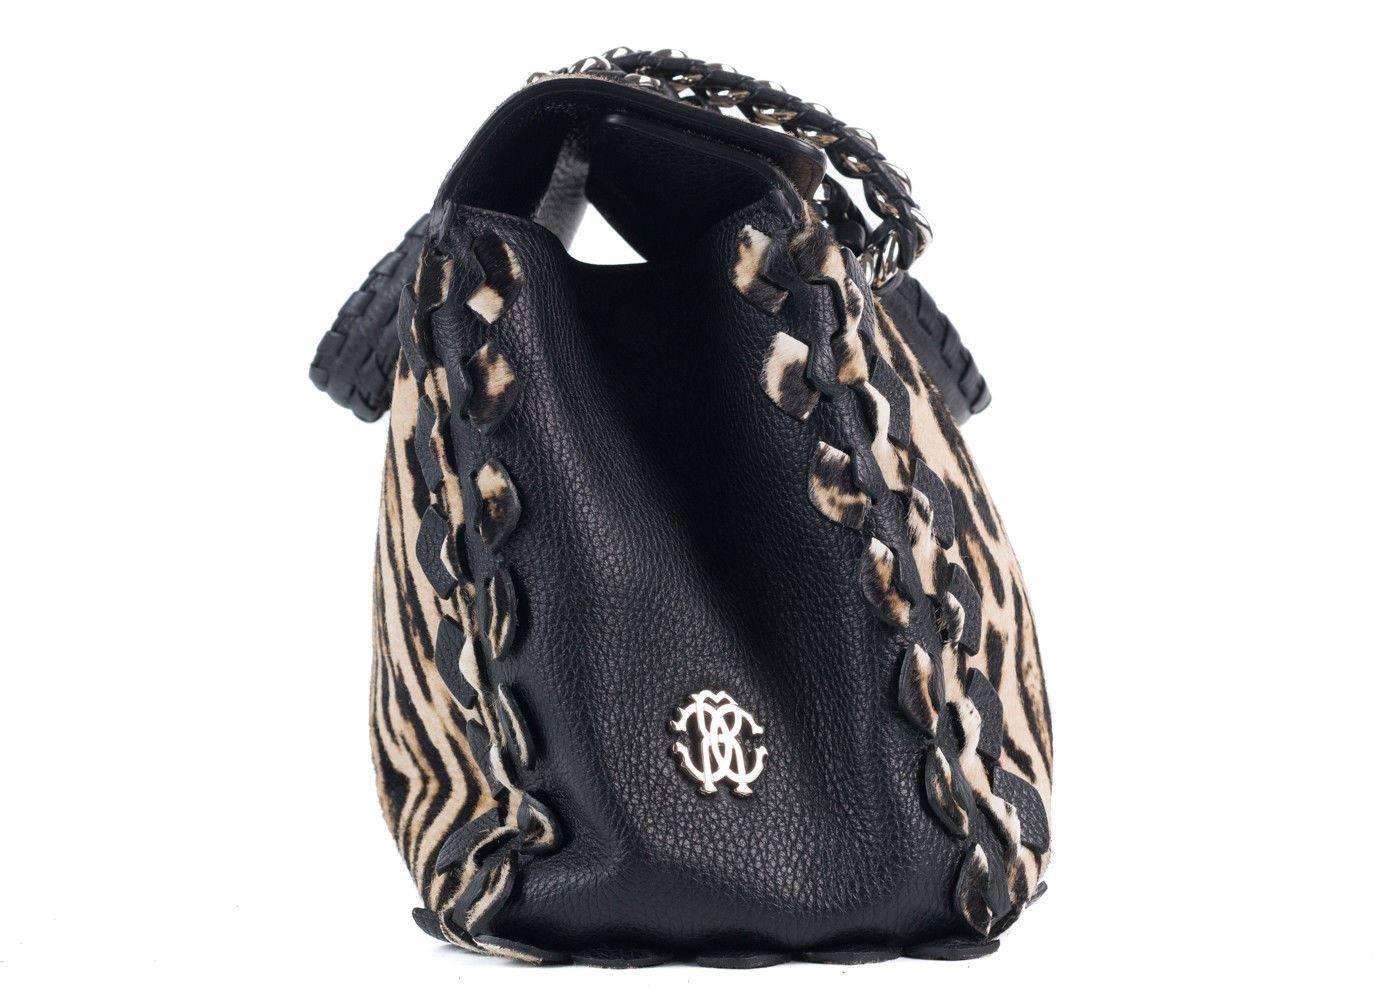 Roberto Cavalli Womens Cheetah Print Pony Hair Black Leather Handbag In New Condition For Sale In Brooklyn, NY